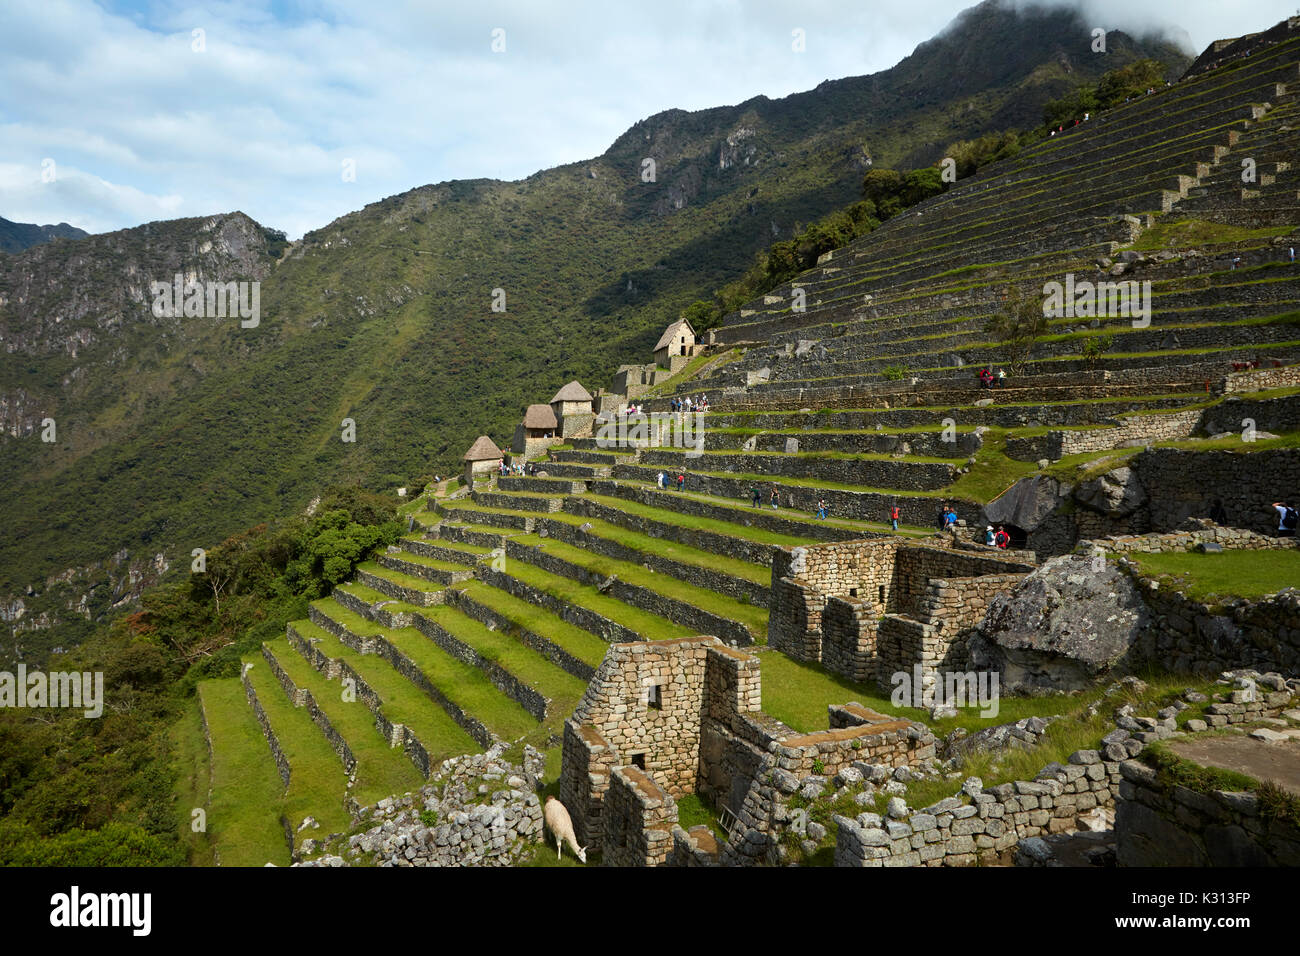 Tourists on agricultural terraces, Machu Picchu (World Heritage Site), Sacred Valley, Peru, South America Stock Photo